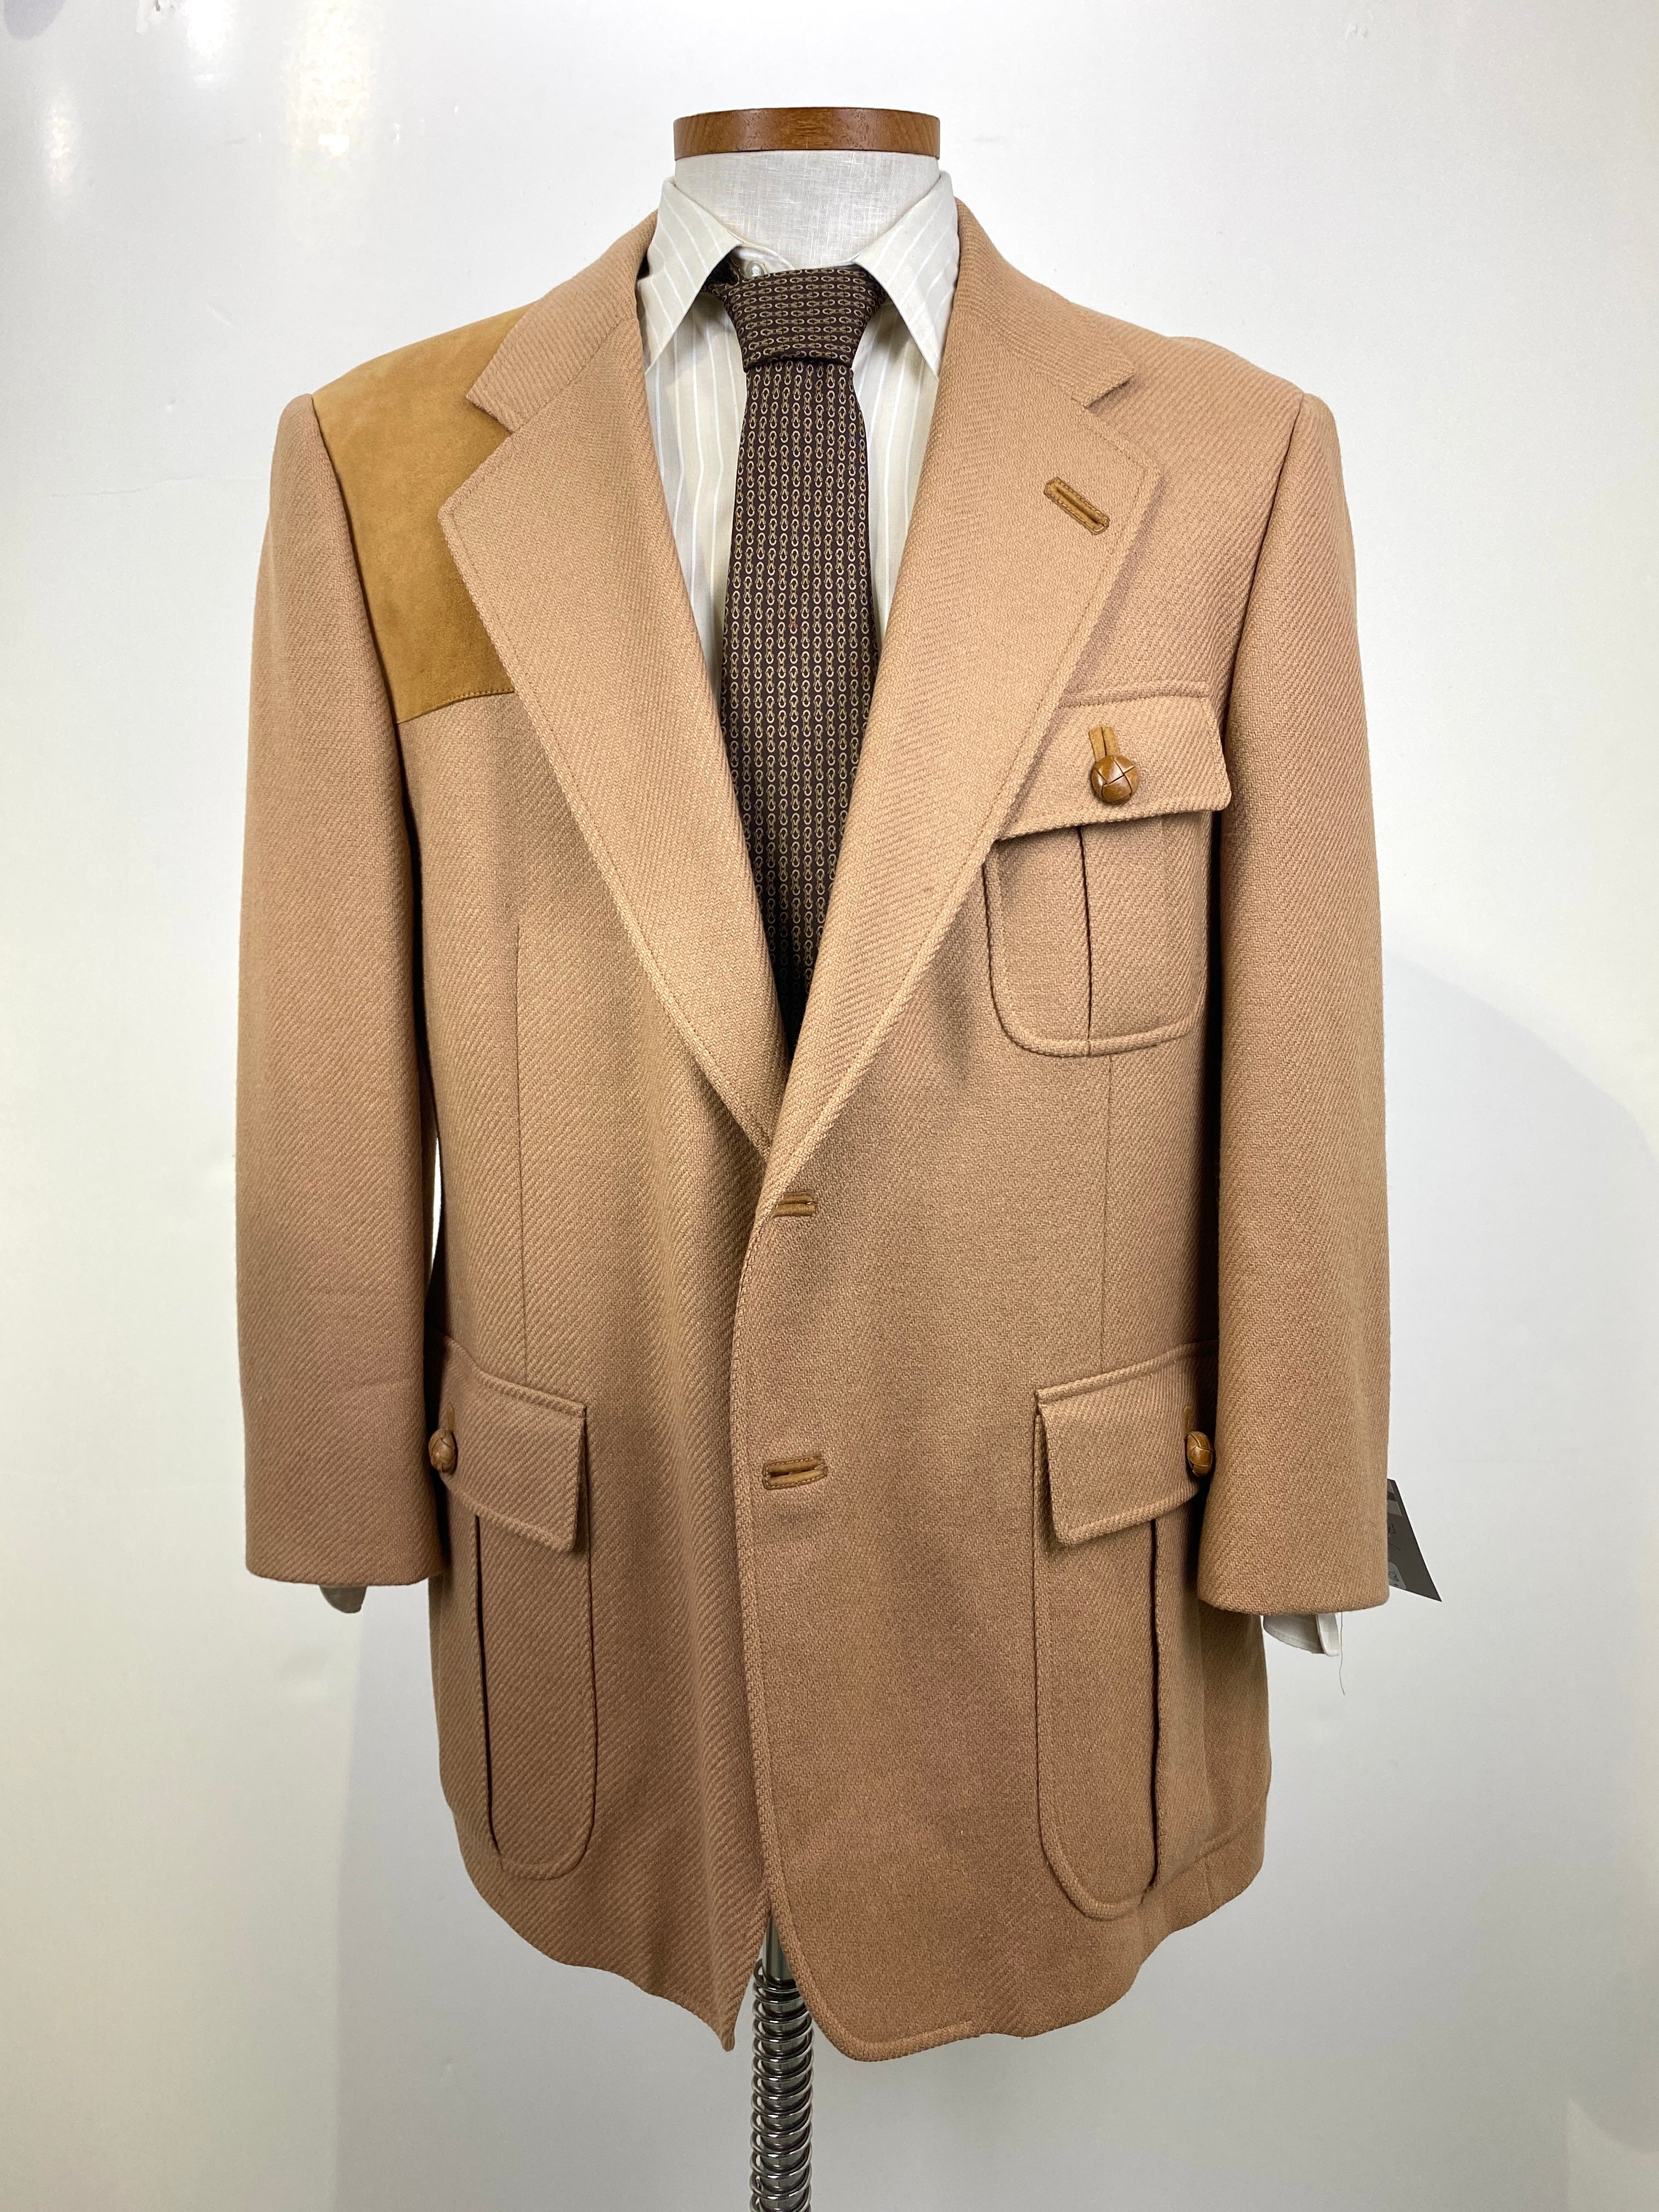 Vintage Men's Suits and Jackets – tagged 